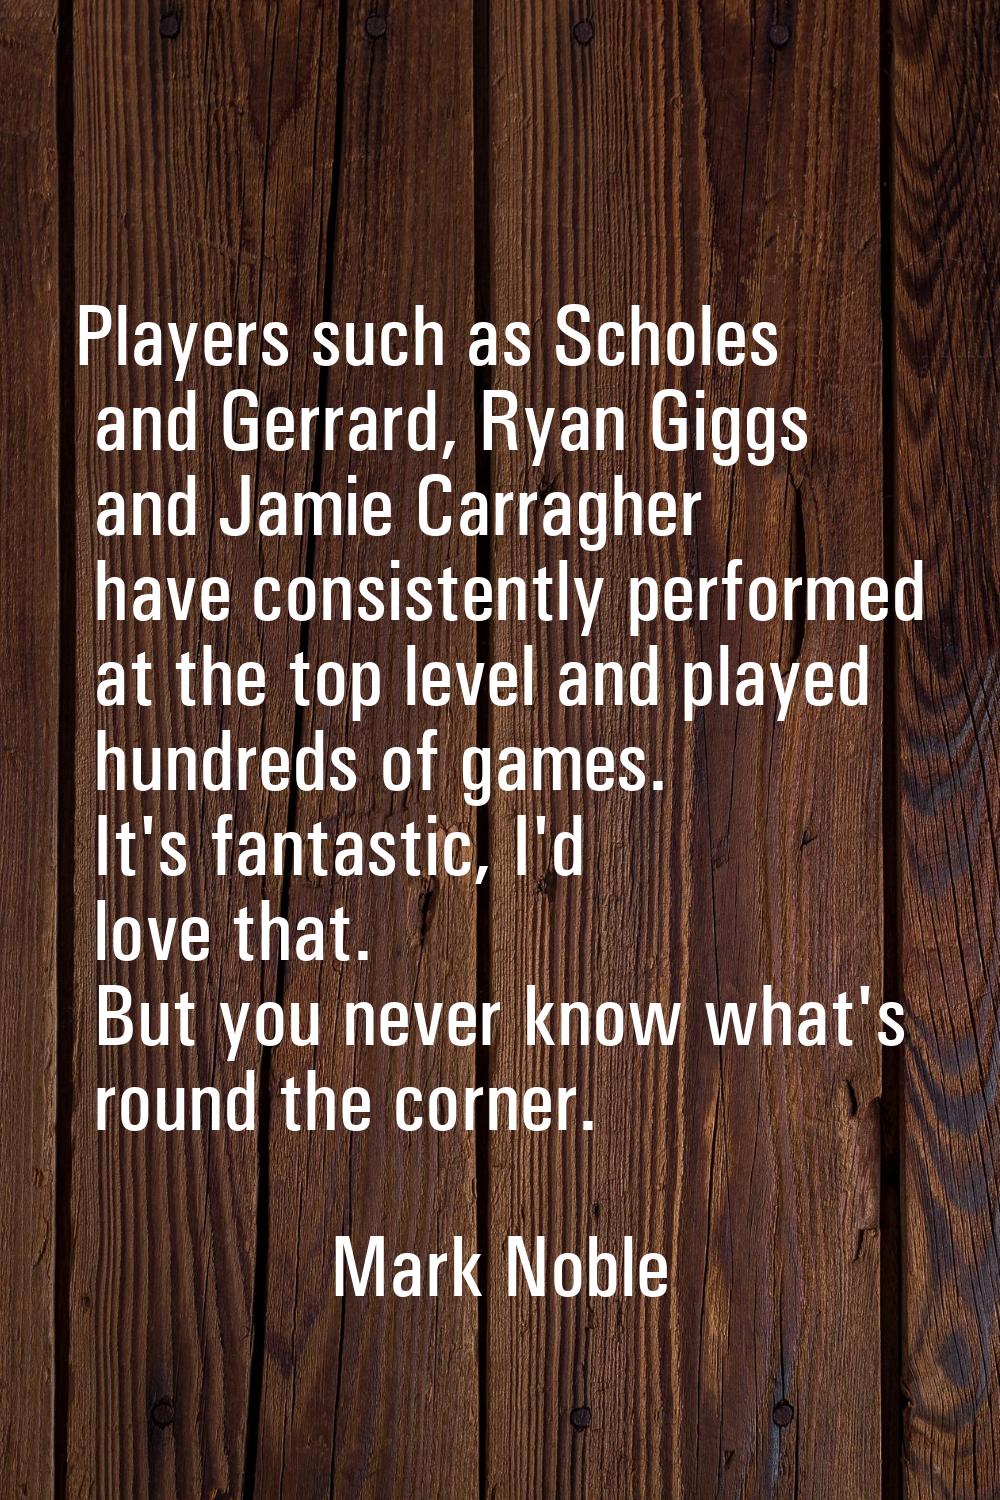 Players such as Scholes and Gerrard, Ryan Giggs and Jamie Carragher have consistently performed at 